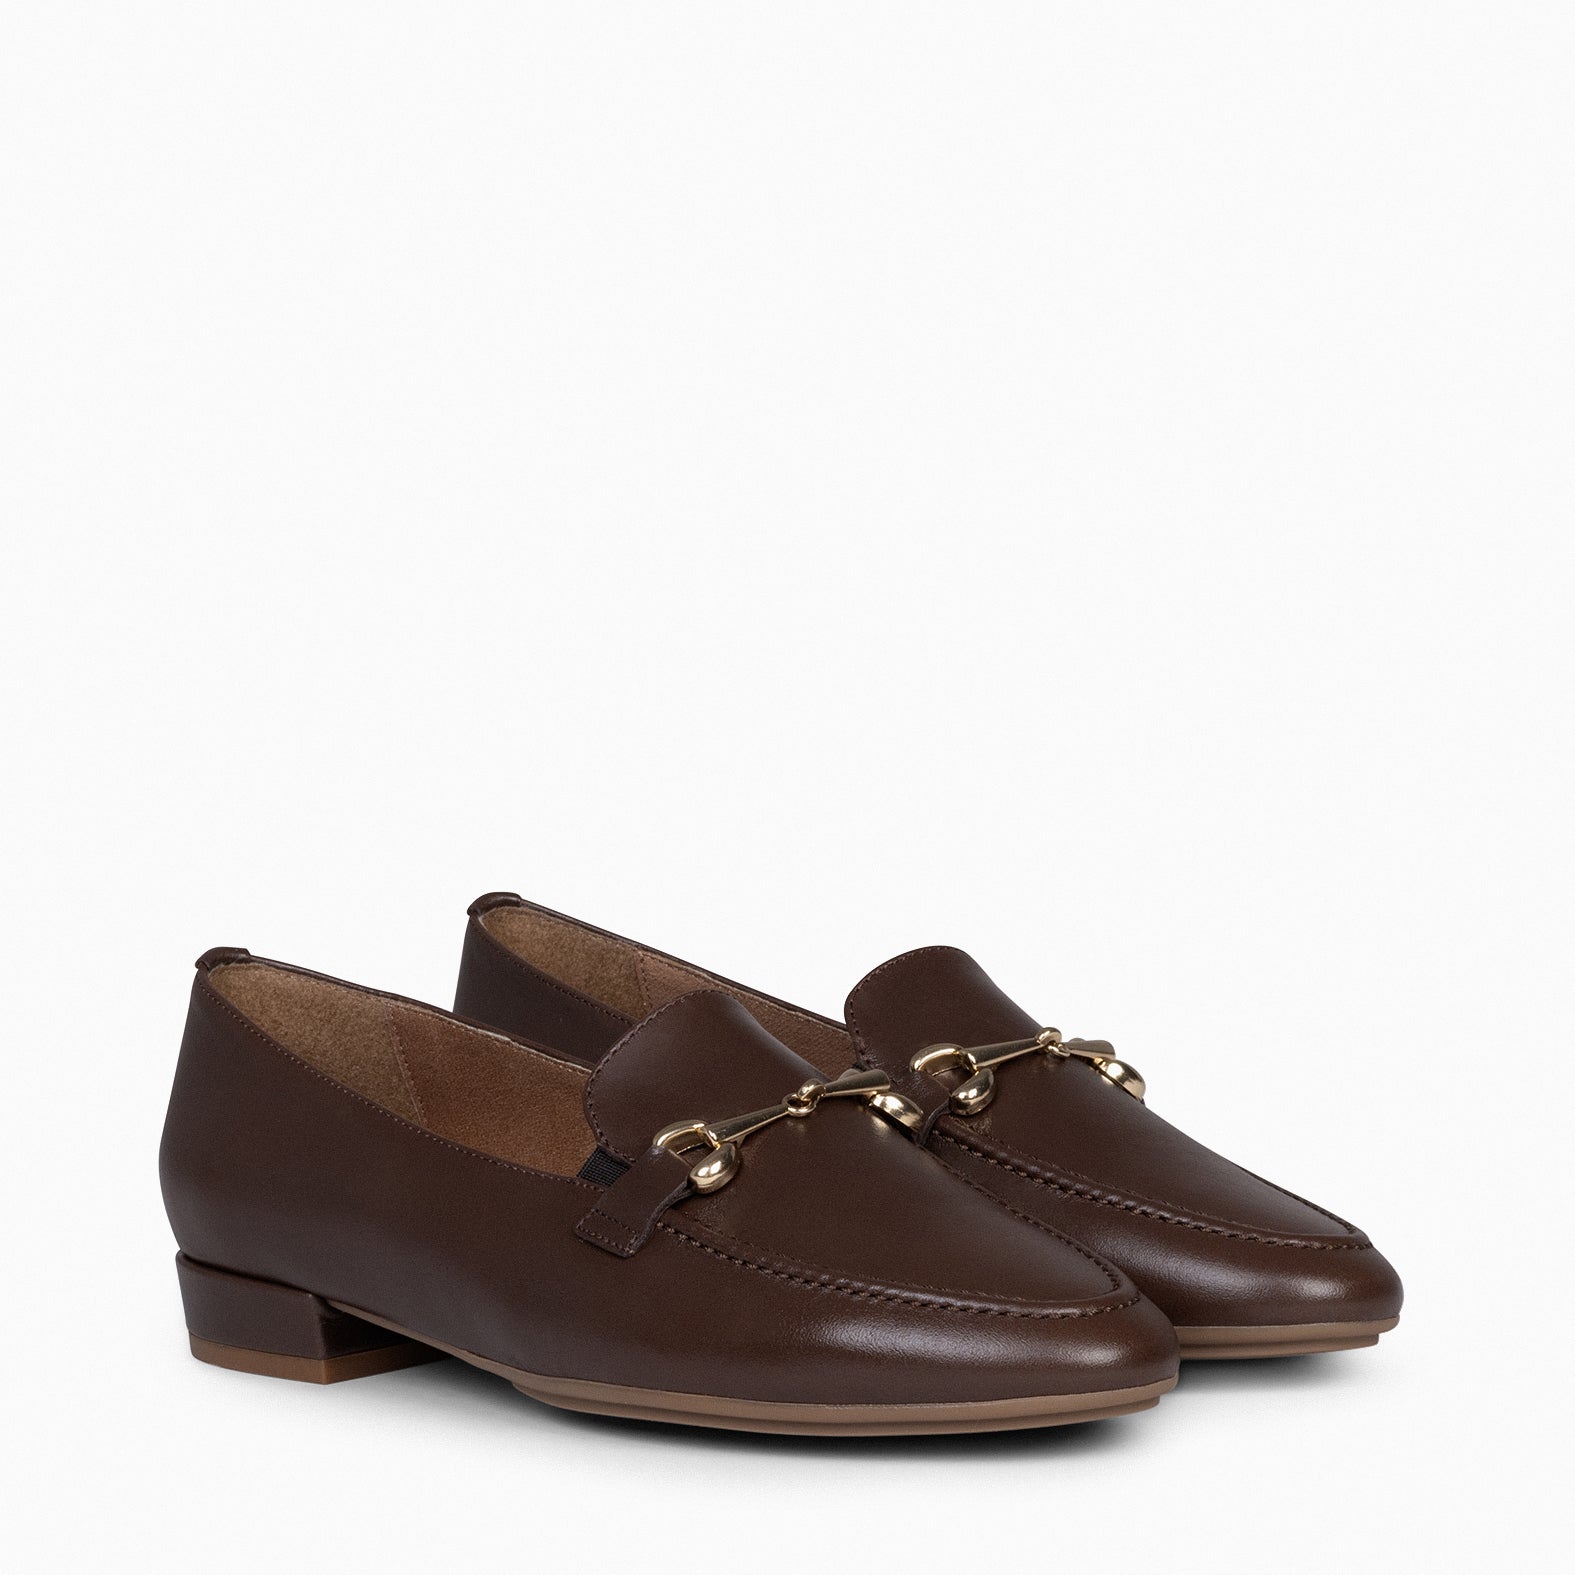 STYLE - BROWN moccasins with metallic detail 